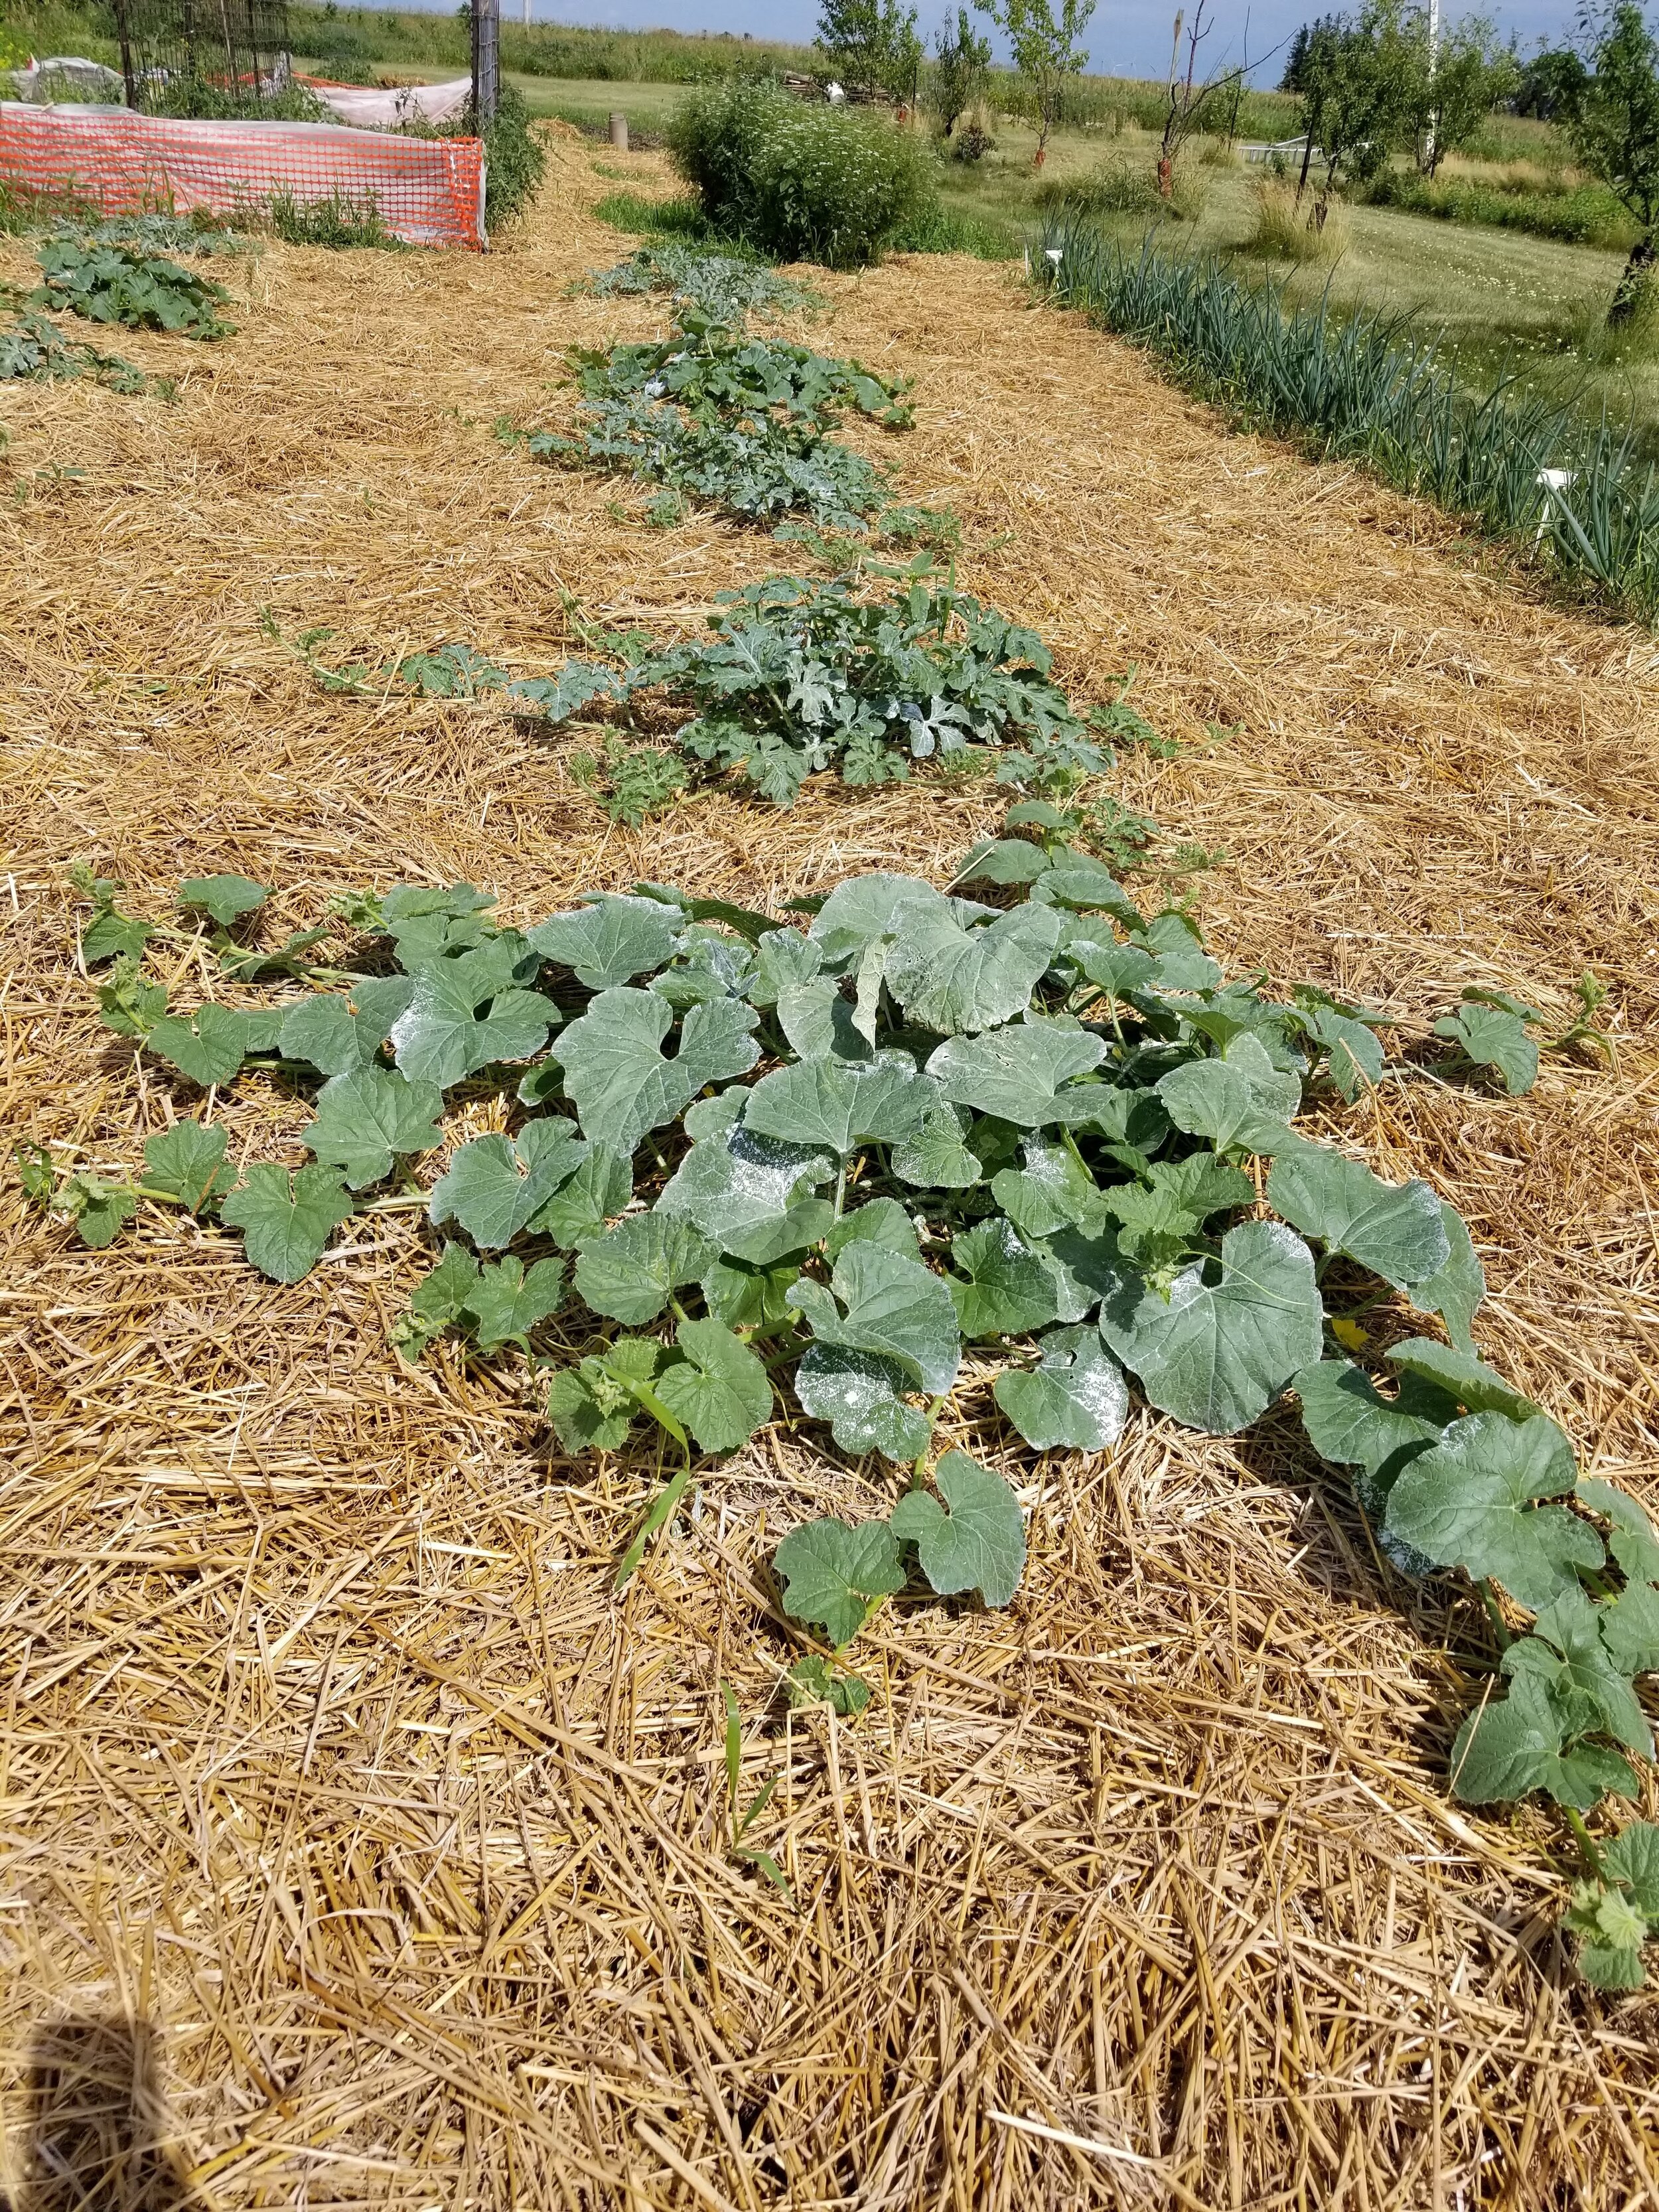 06.26.20 Melons and watermelons spreading their vines